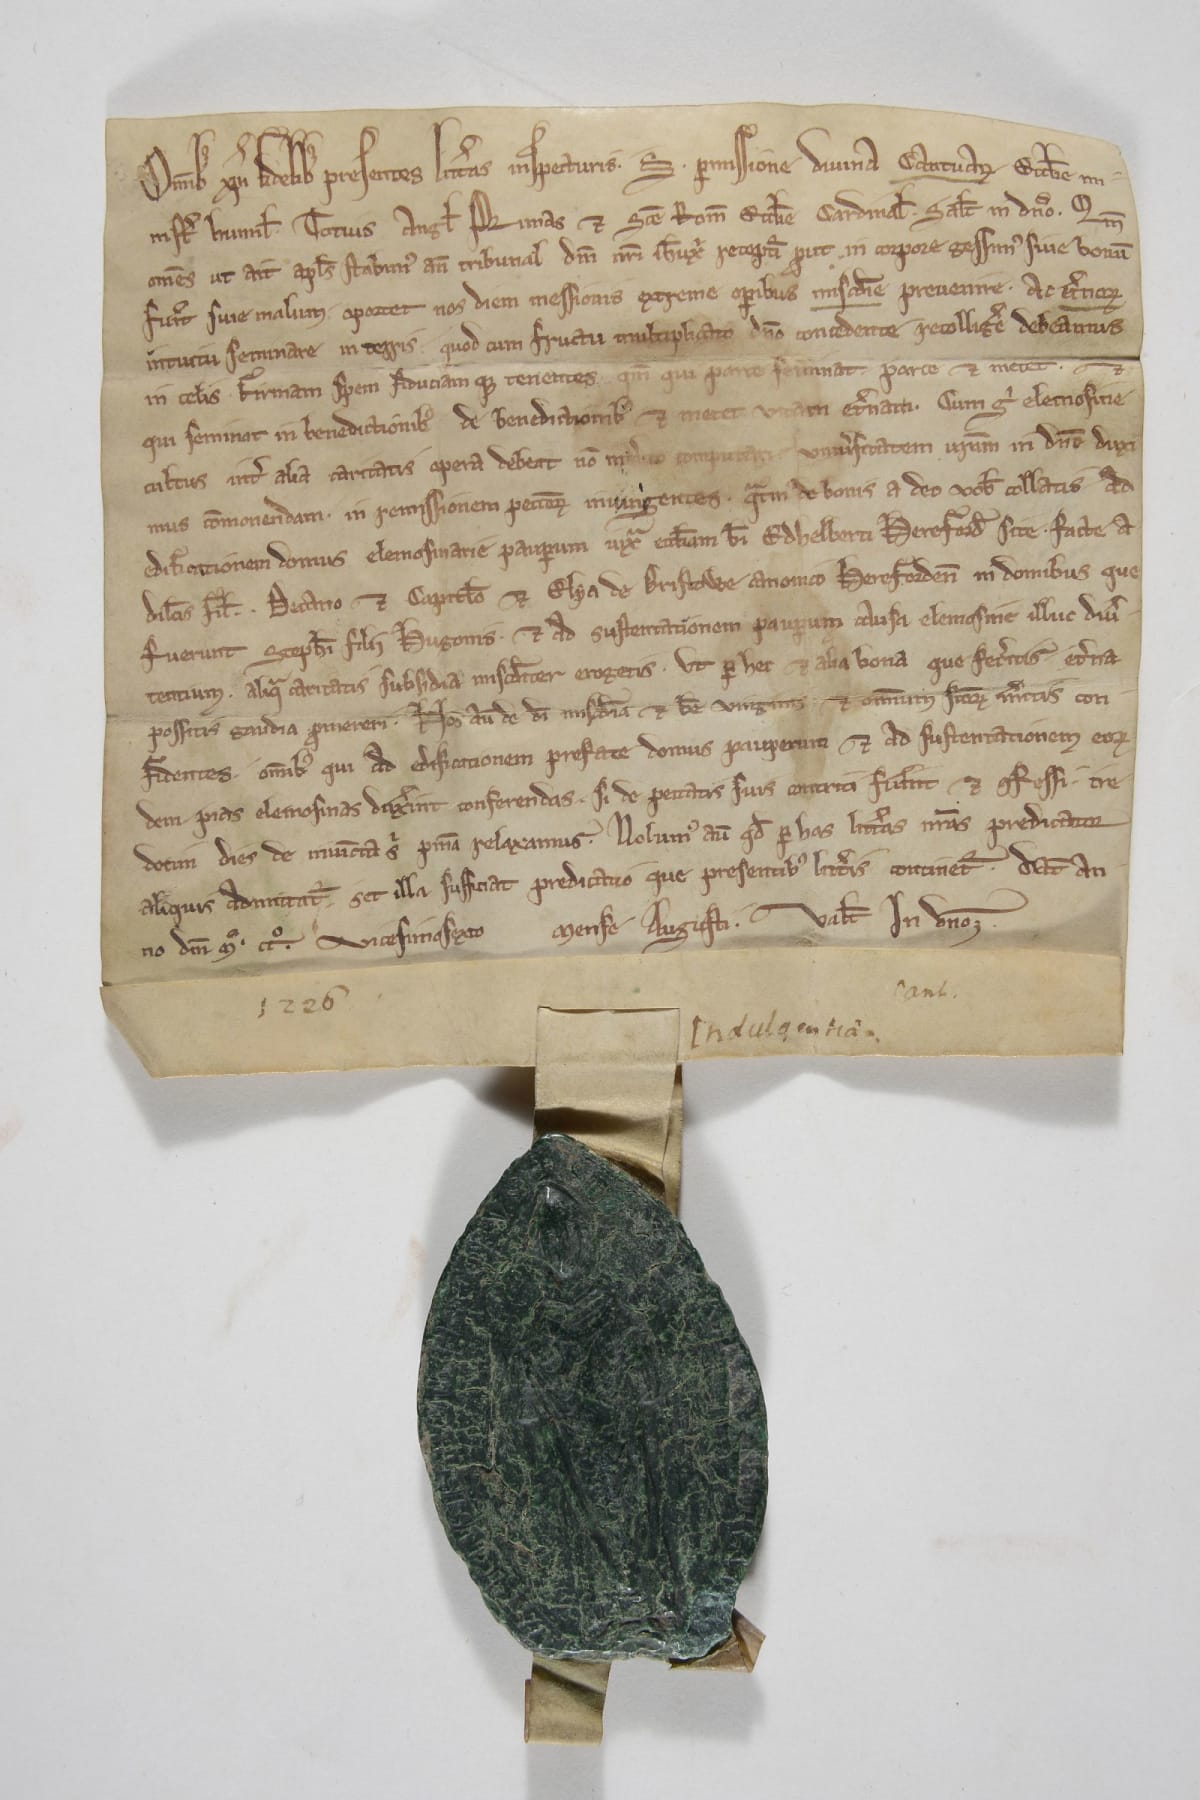 •	A square-shaped document, written on parchment, with a green lozenge-shaped seal attached to the centre of its base.